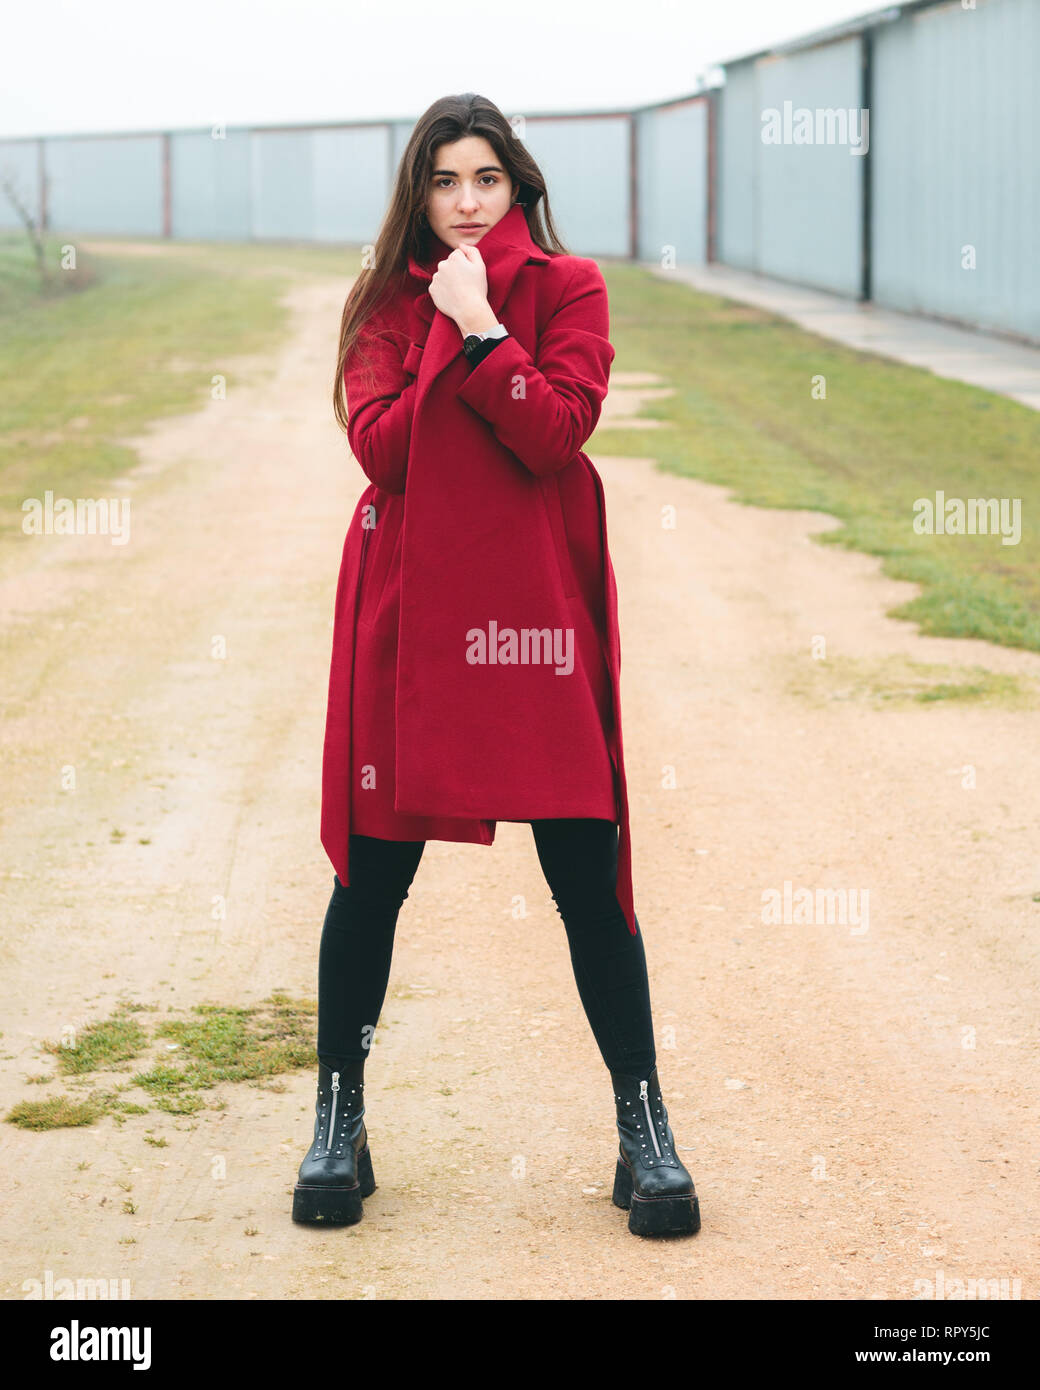 Fashion woman portrait of young pretty girl posing in a rural scene in Europe. Winter and spring fashion, wearing a red jacket. Stock Photo